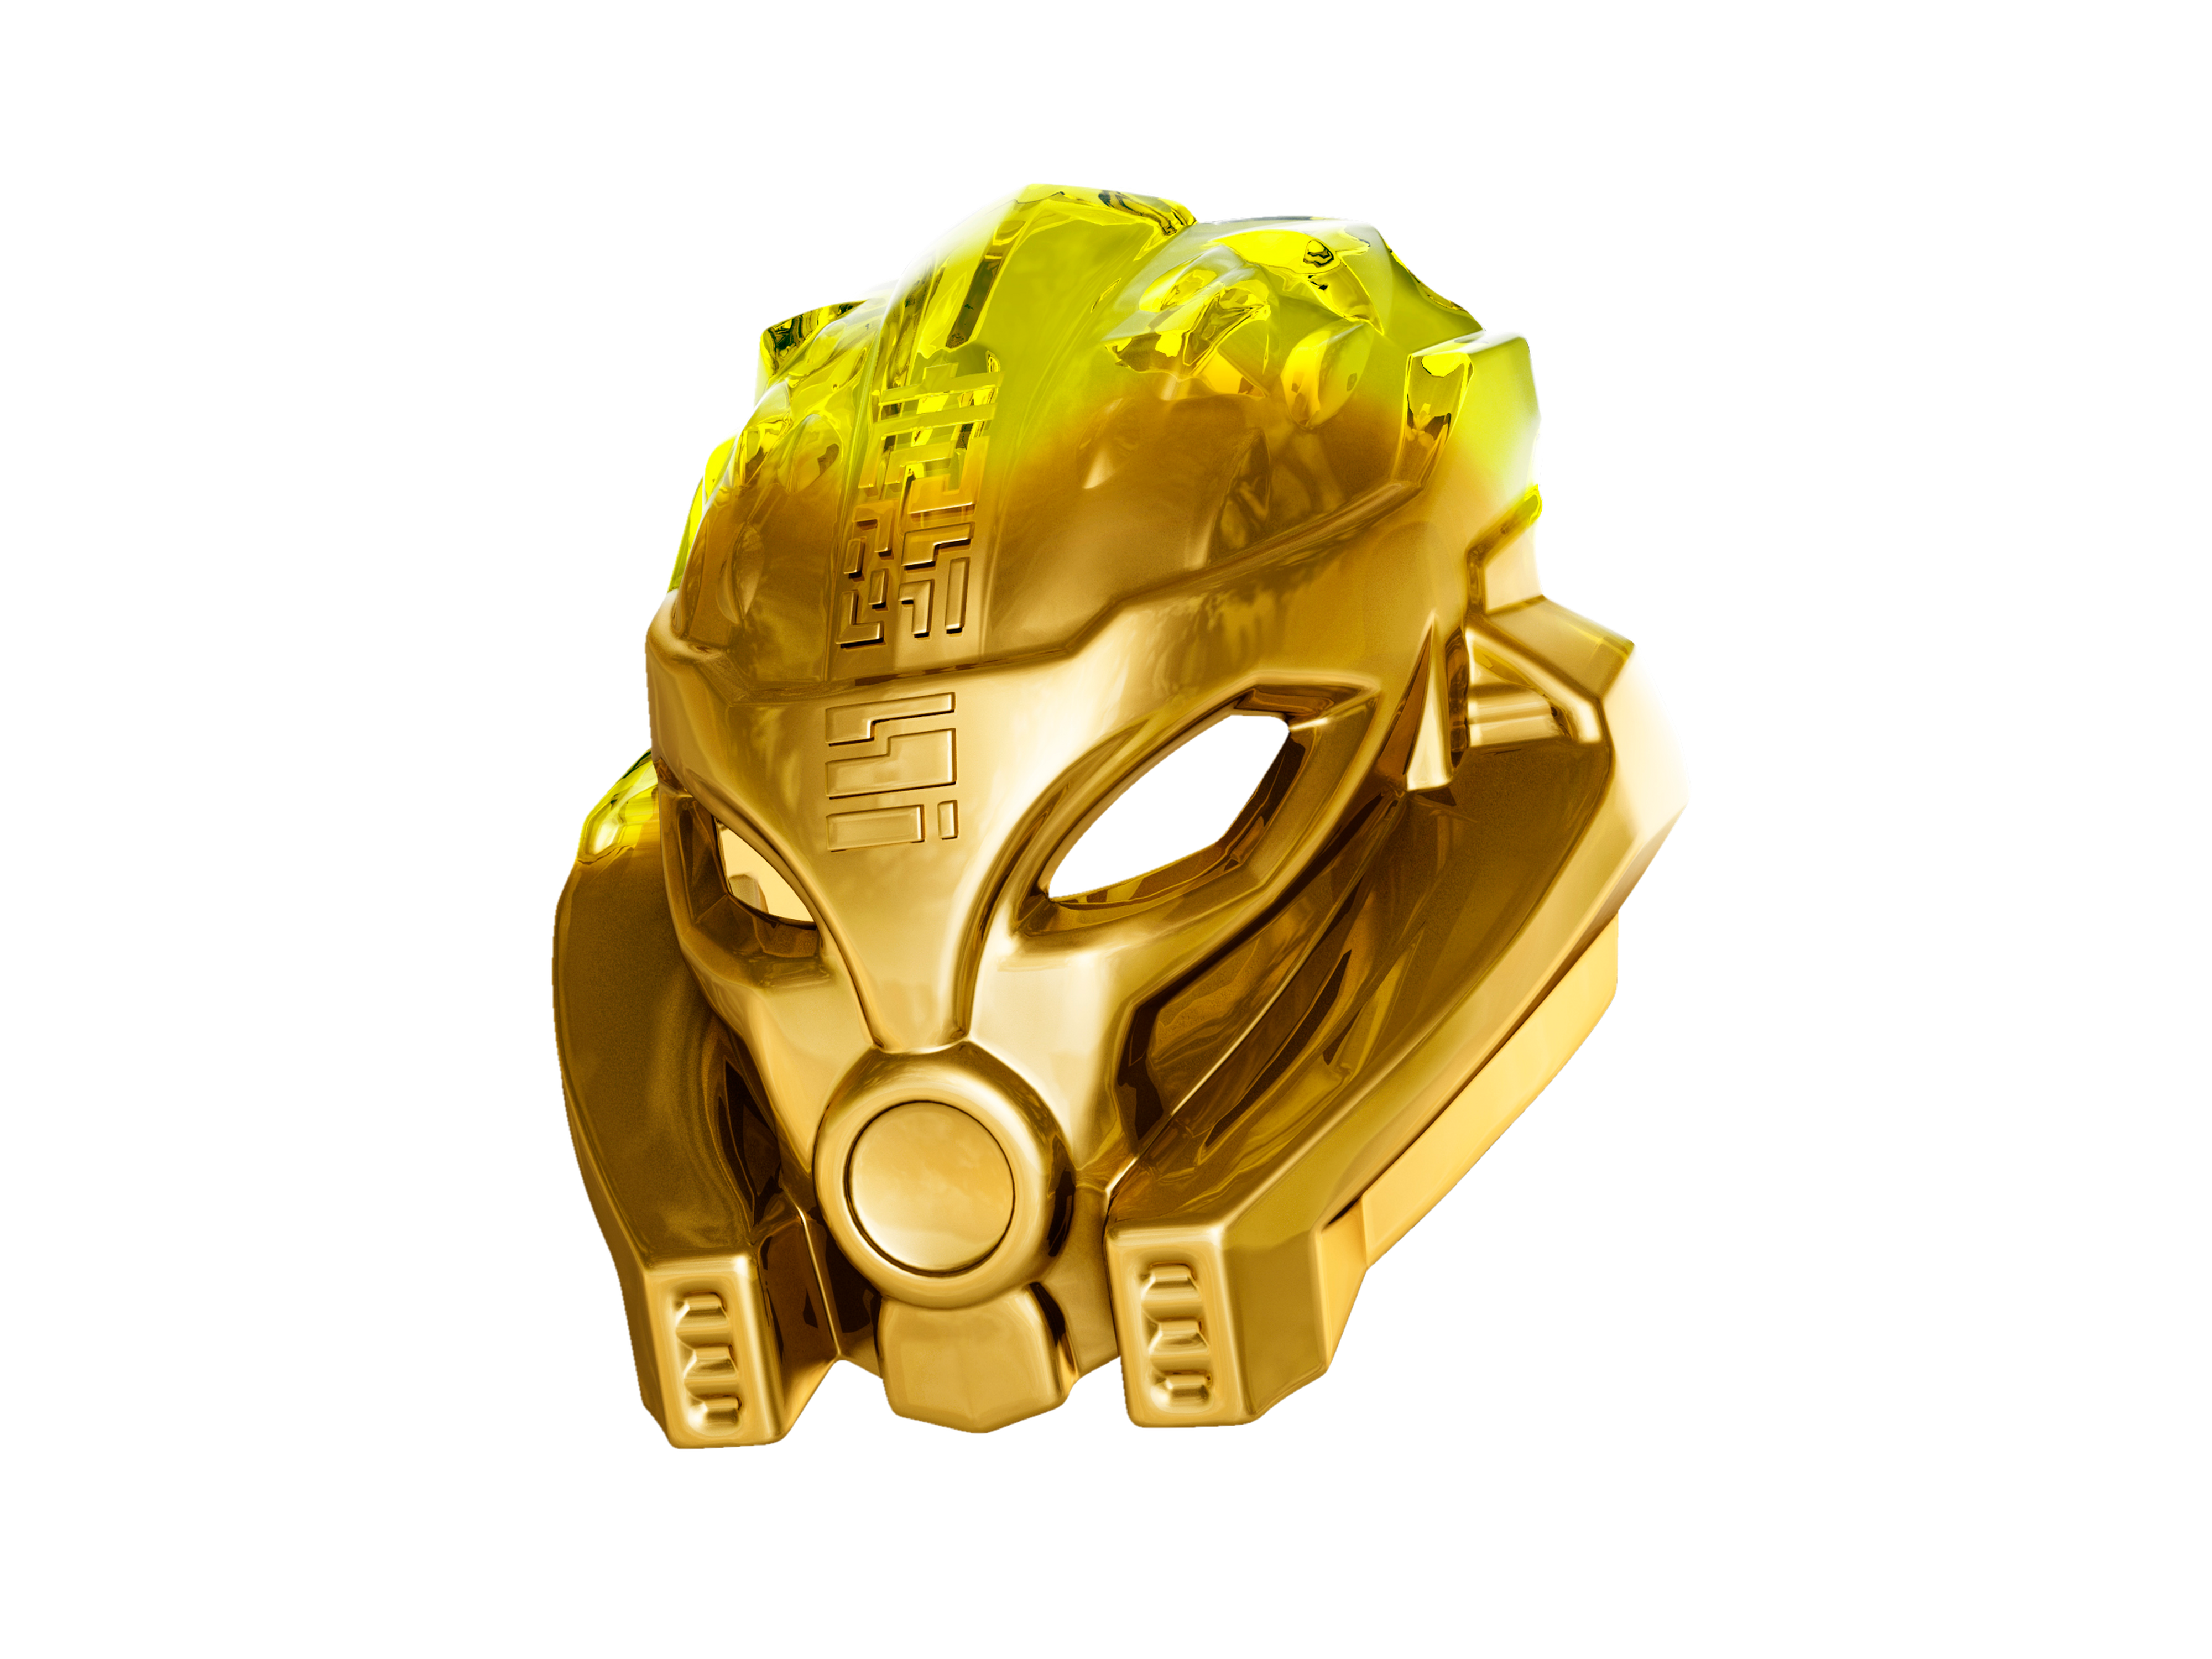 impressionisme Colonial Forbyde Golden Unity Mask of Stone | The BIONICLE Wiki | Fandom